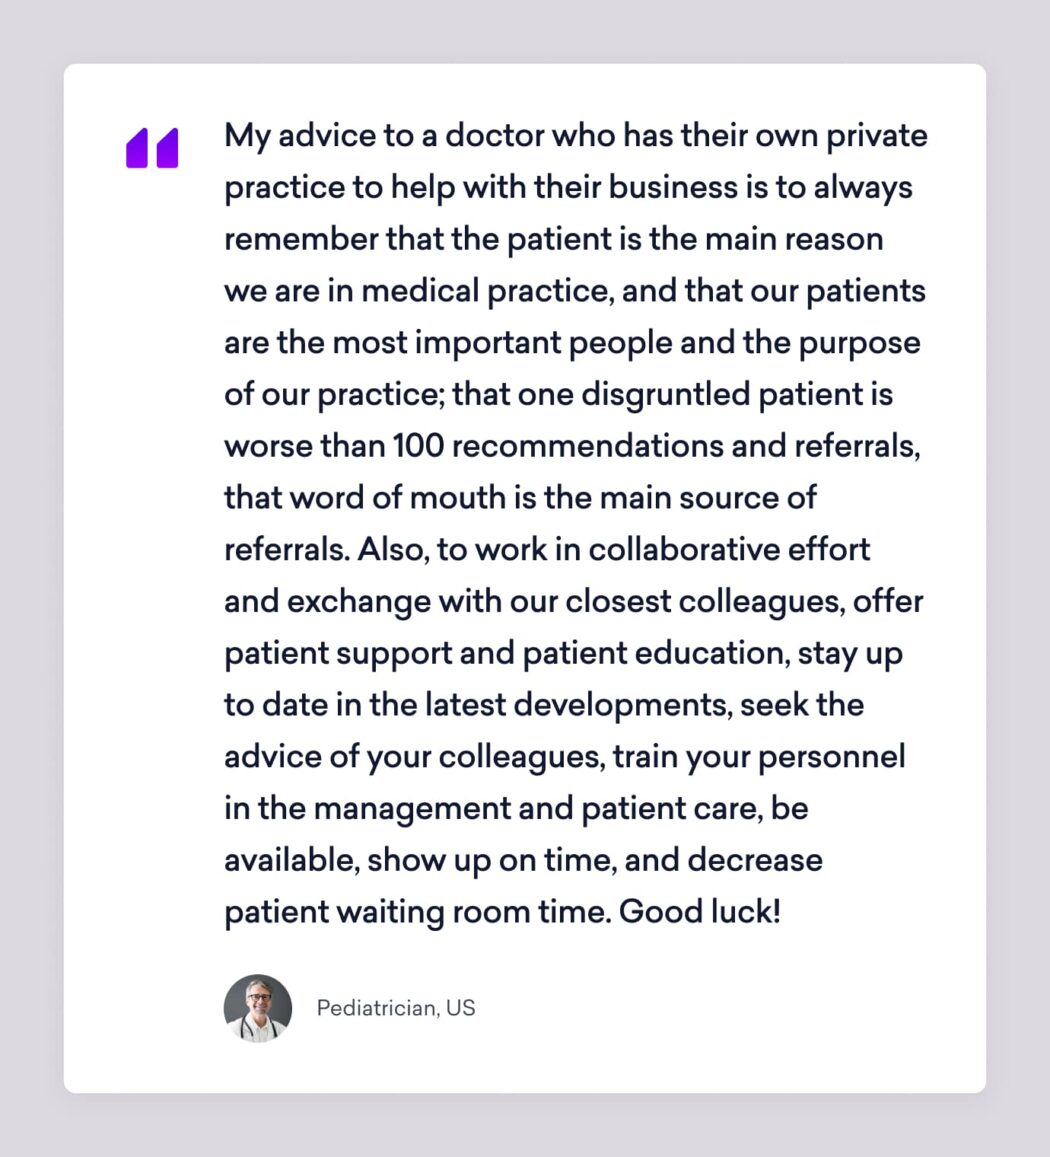 a pediatrician sermo member says, "my advice to a doctor who has their own private practice to hep with their business is always to remember that the patient is the main reason we are in medical practice, and that our patients are the most important people and the purpose of our practice; that one disgruntled patient is worse than 100 recommendations and referrals, that word of mouth is the main source of referrals. Also, to work in collaborative efforts and exchange with our closest colleagues, offer patient support and patient education, stay up to date in the latest developments, seek the advice of your colleagues, train your personnel in the management and patient care, be available, show up on time, and decrease patient waiting room time. Good luck!"